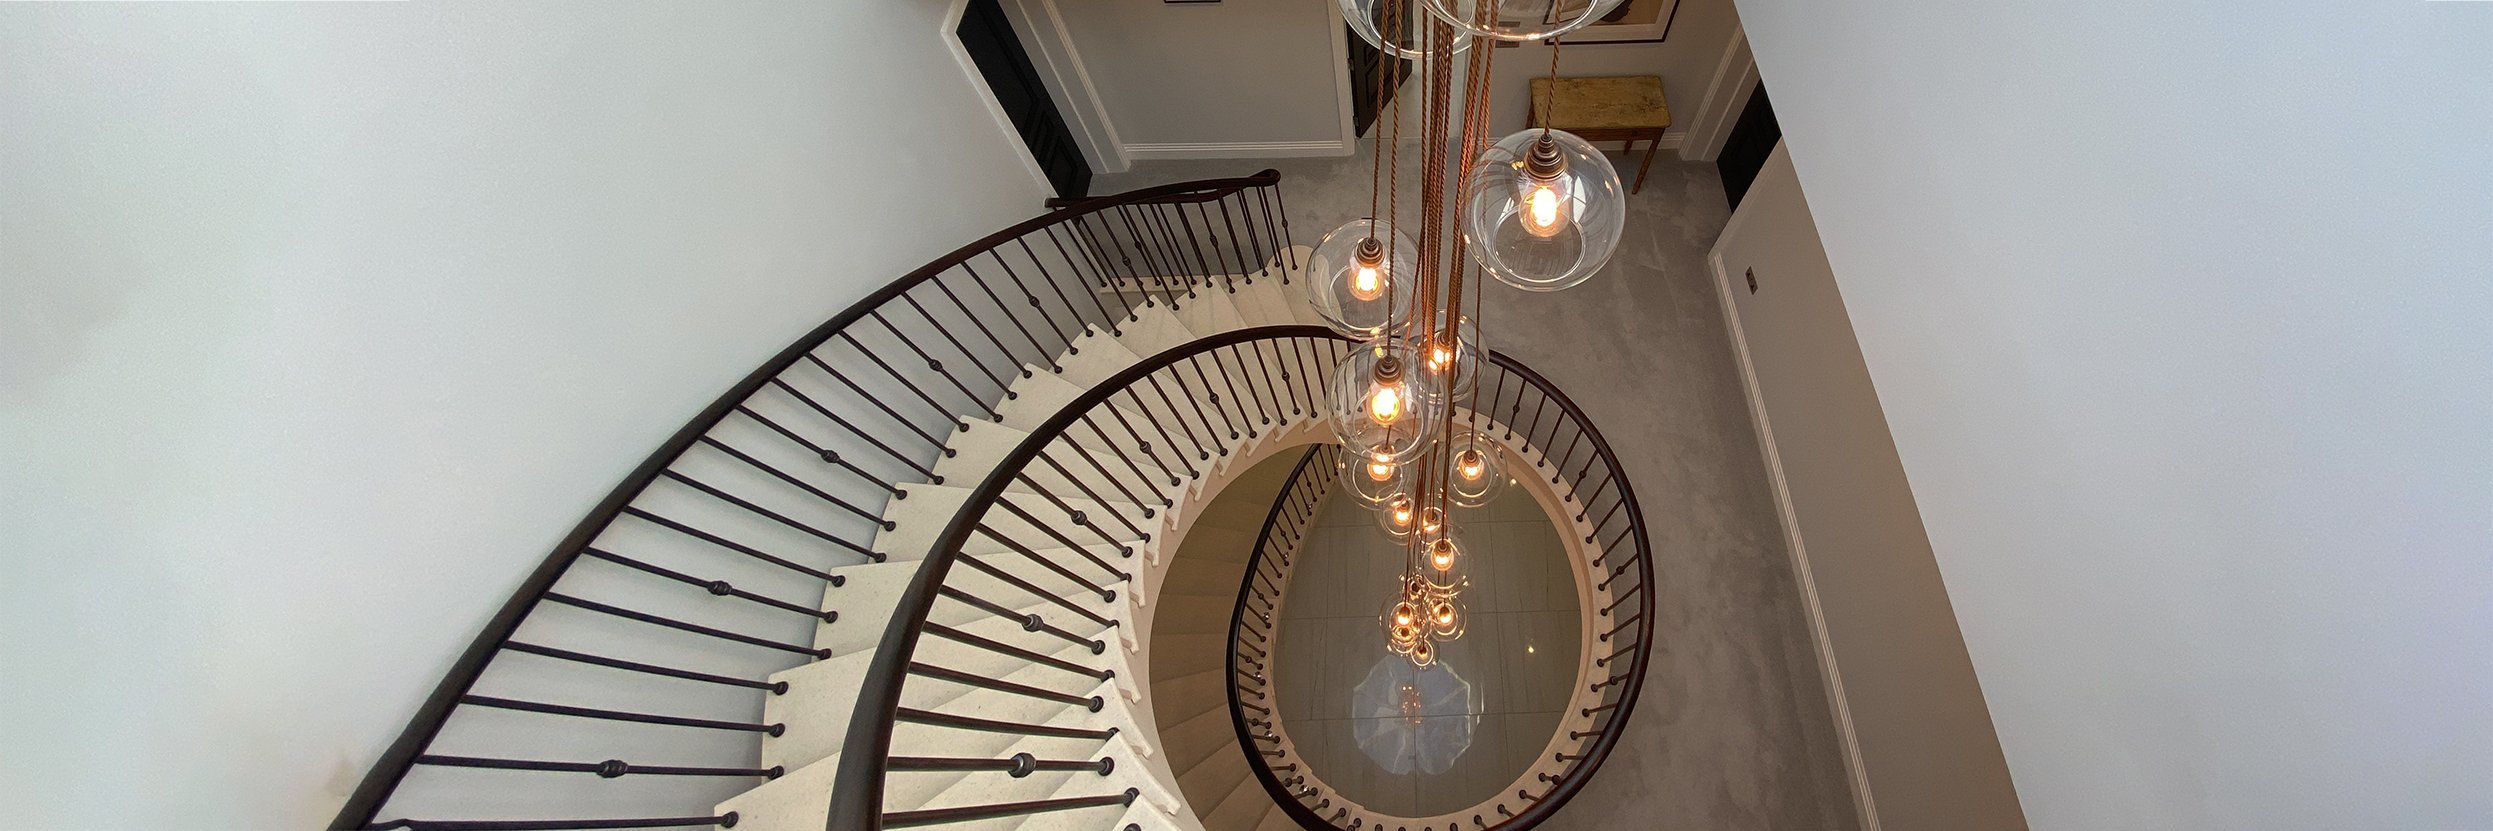 Spiral stairway adorned with cluster of clear globe lights, ideal stairwell lighting ideas for residential or commercial stairwells.